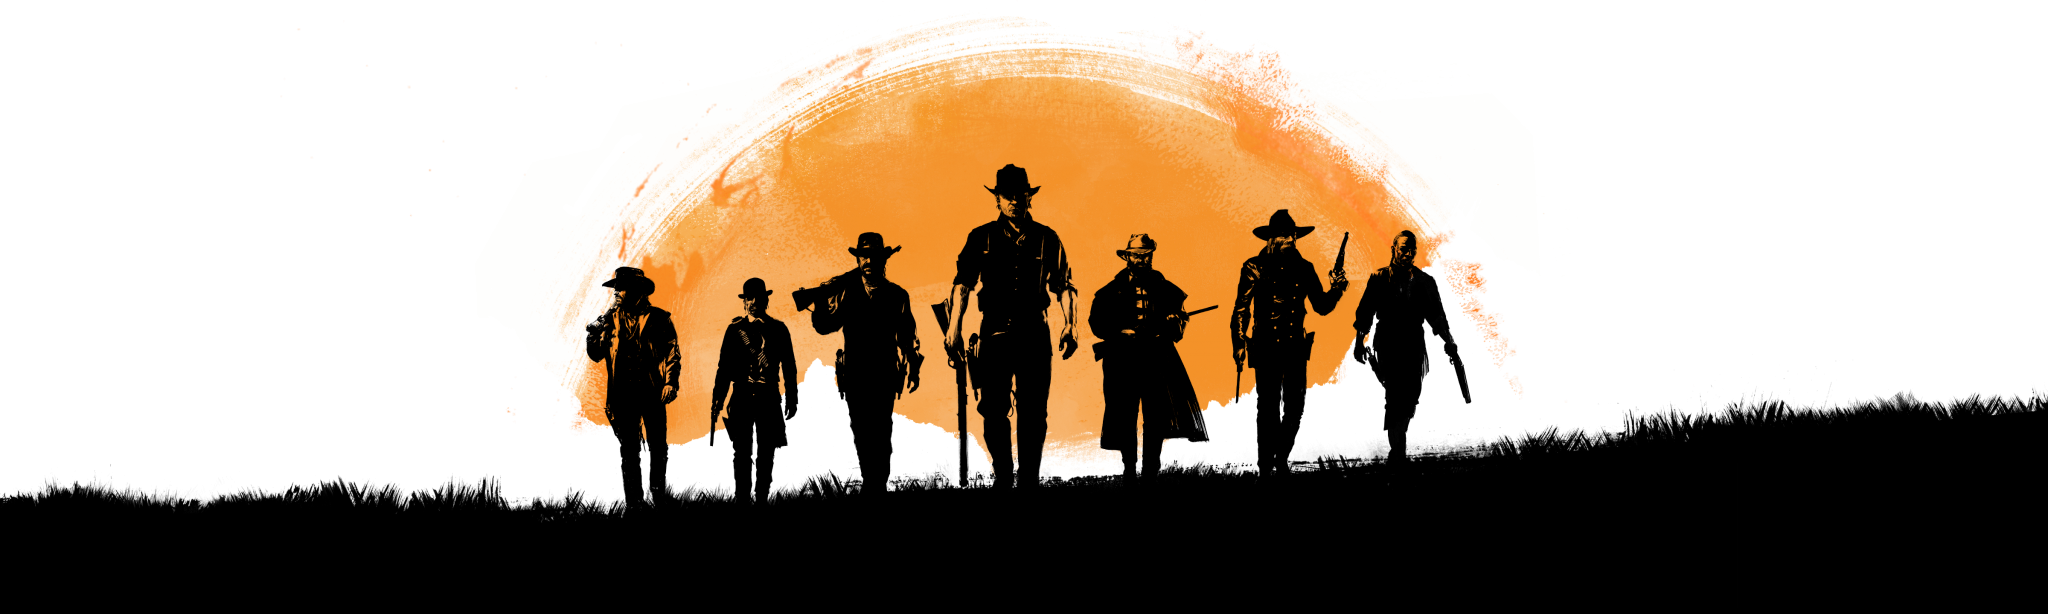 Red Dead Redemption 2 Will Be A Sequel To The Original - Red Dead Redemption 2 Artwork (2048x614), Png Download